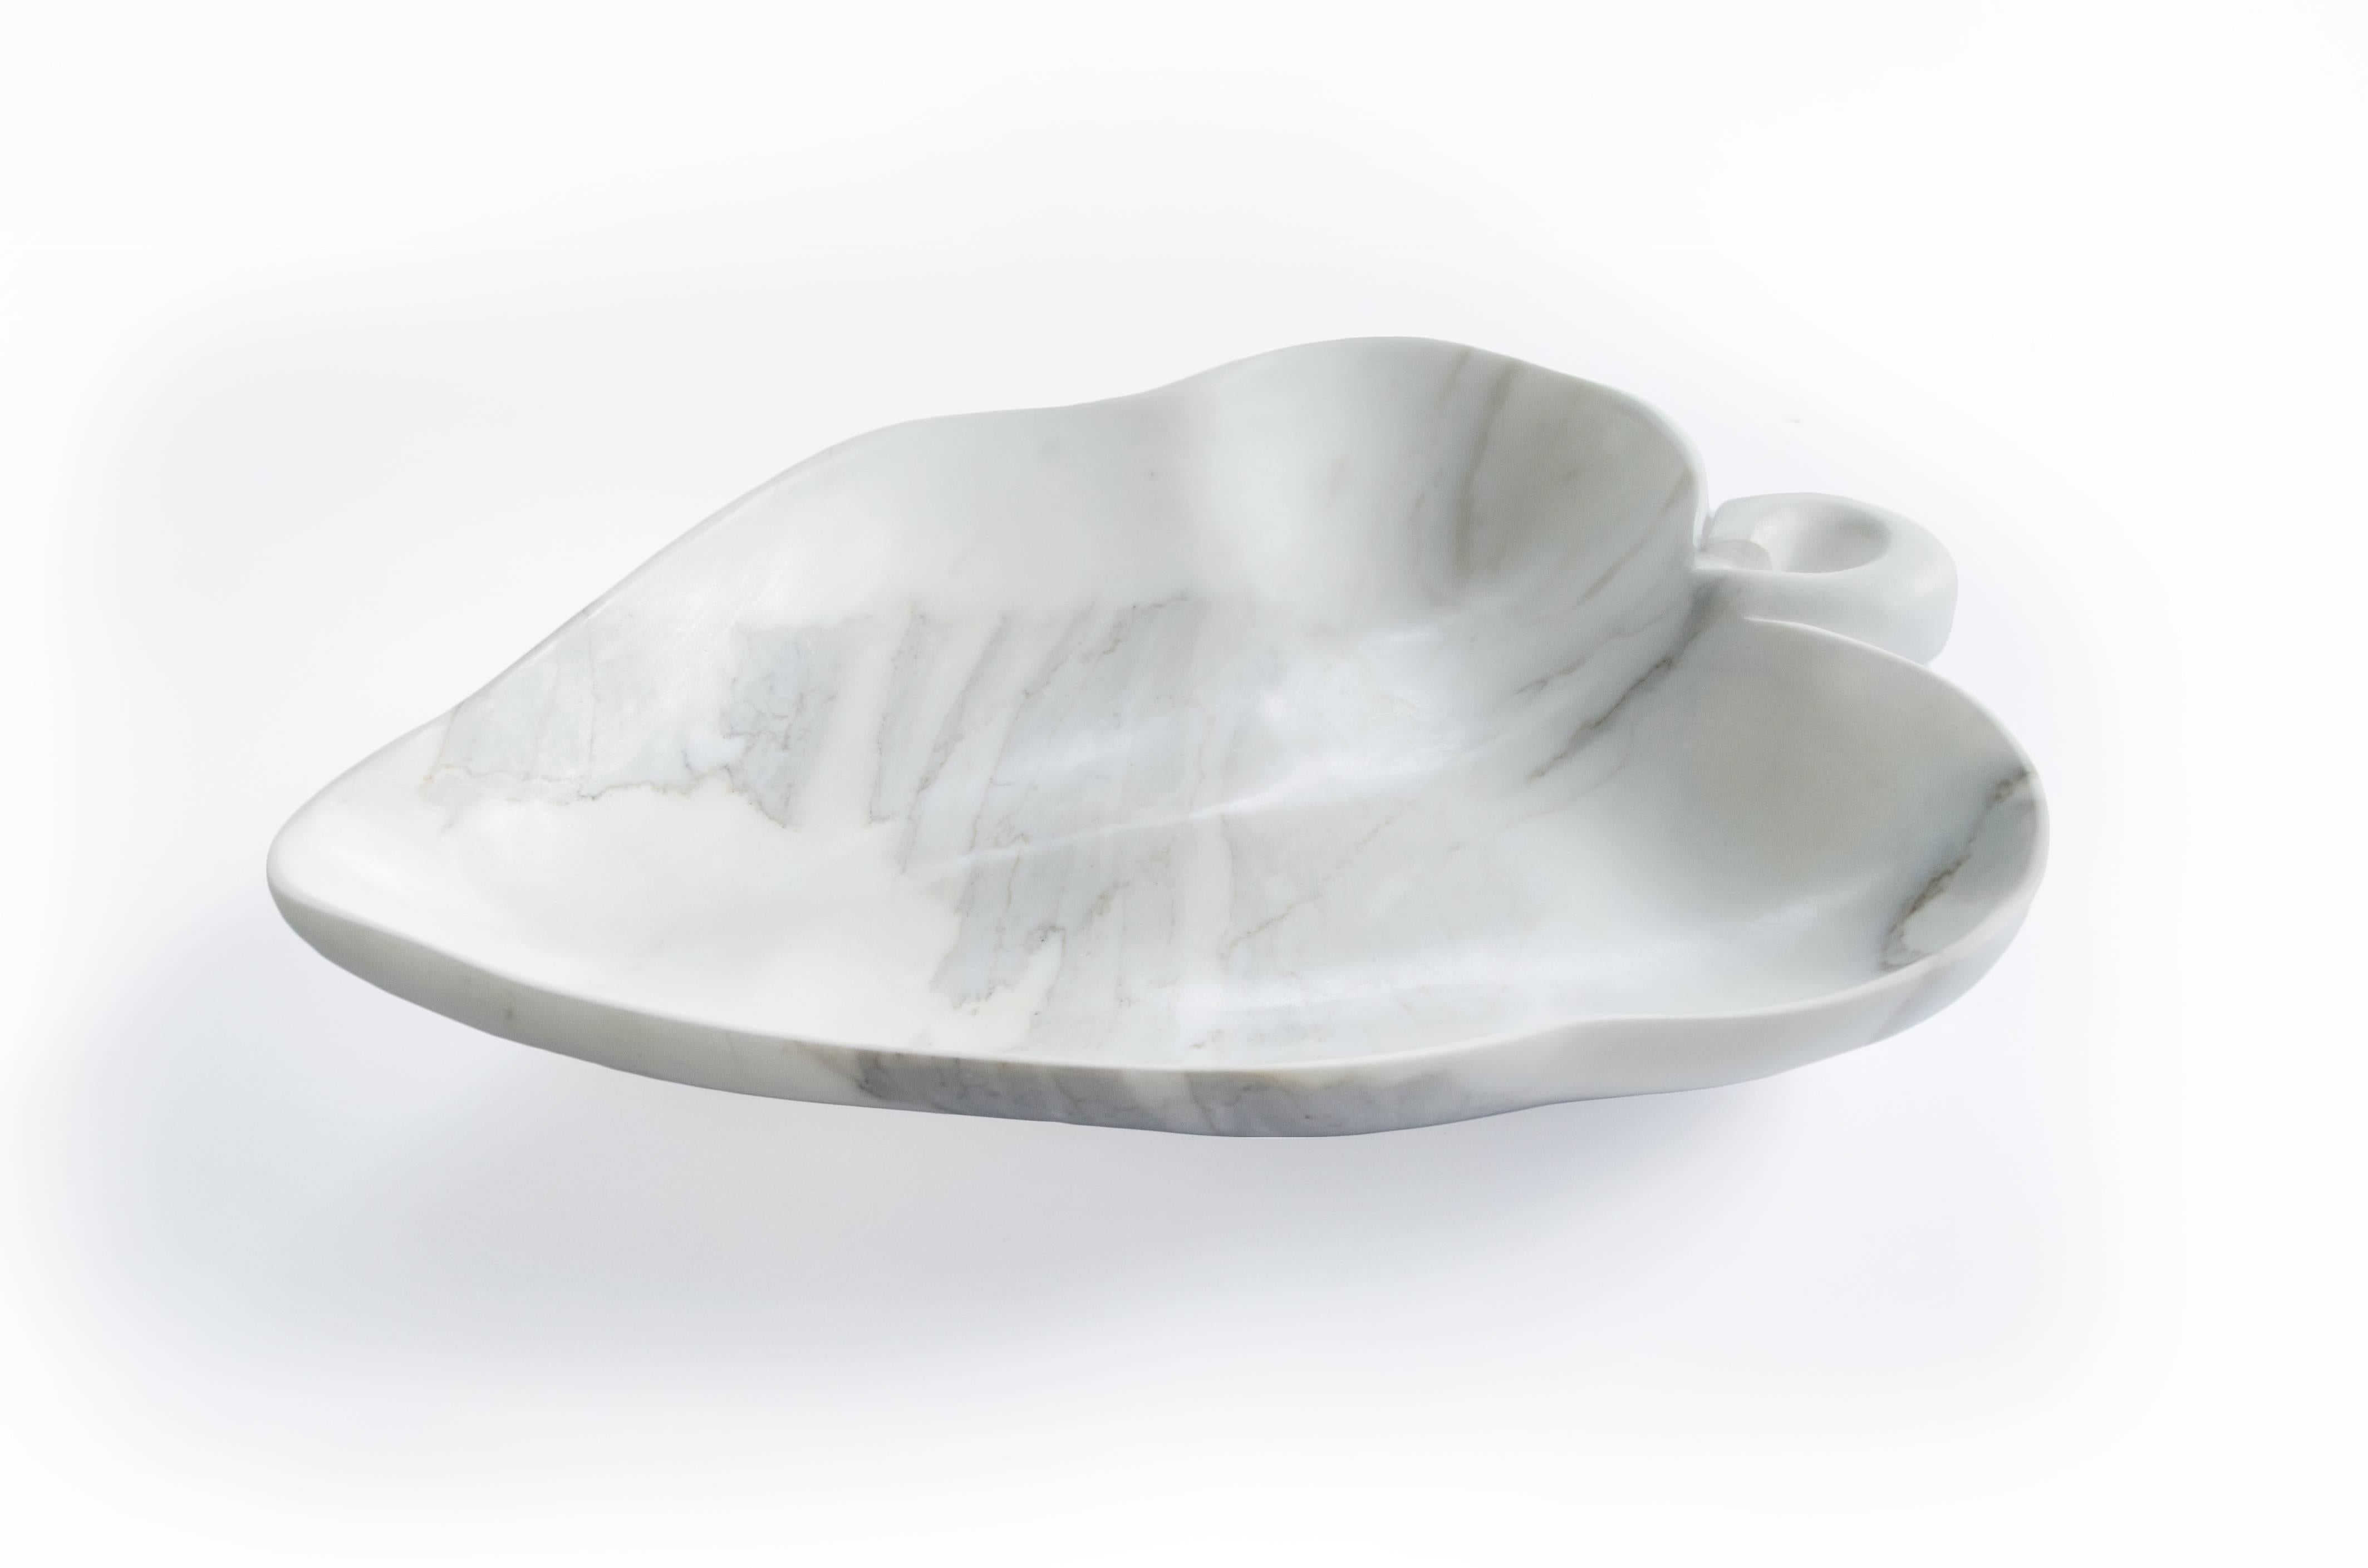 Big bowl in Calacatta marble with the shape of a leaf. Each piece is in a way unique (since each marble block is different in veins and shades) and handmade by Italian artisans specialized over generations in processing the famous Carrara marble.